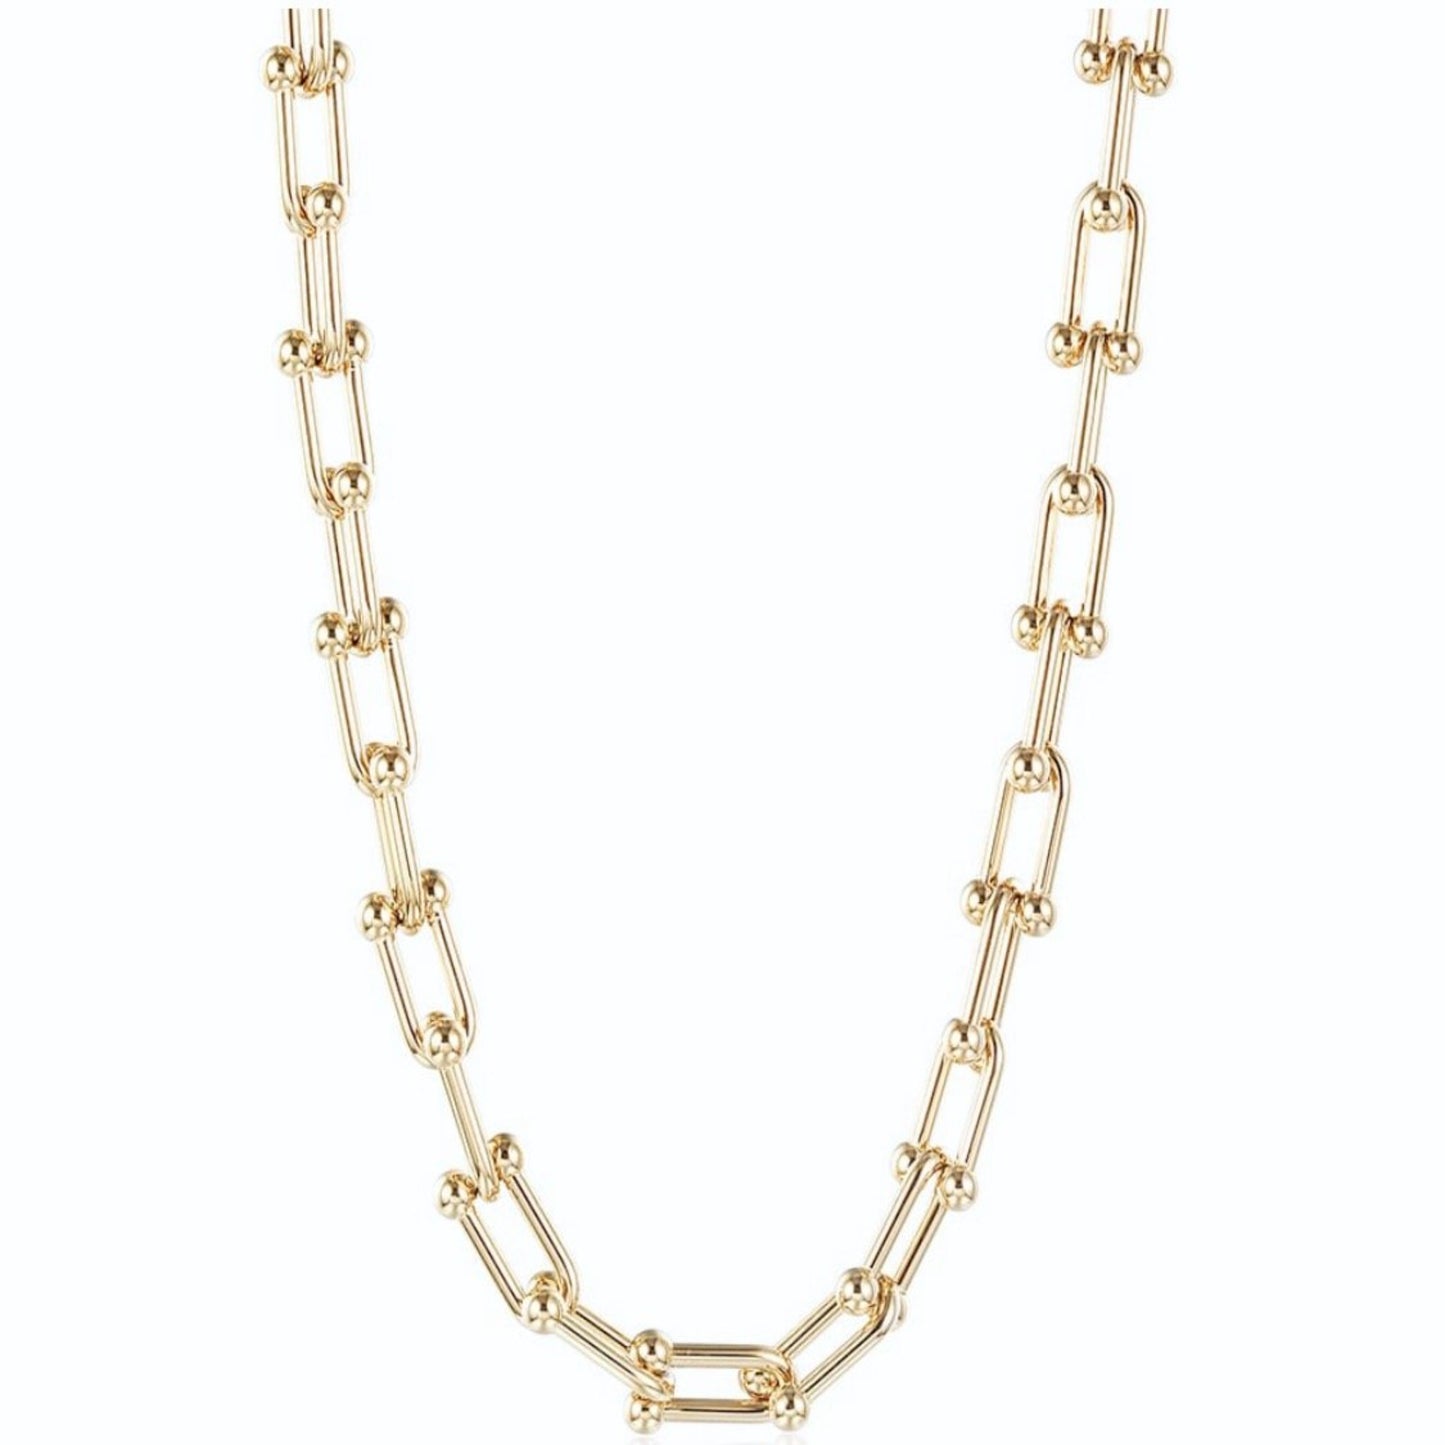 U link Chain necklace, gold-plated over stainless steel, water and sweat resistant jewelry, tarnish resistant jewelry, isvi boutique